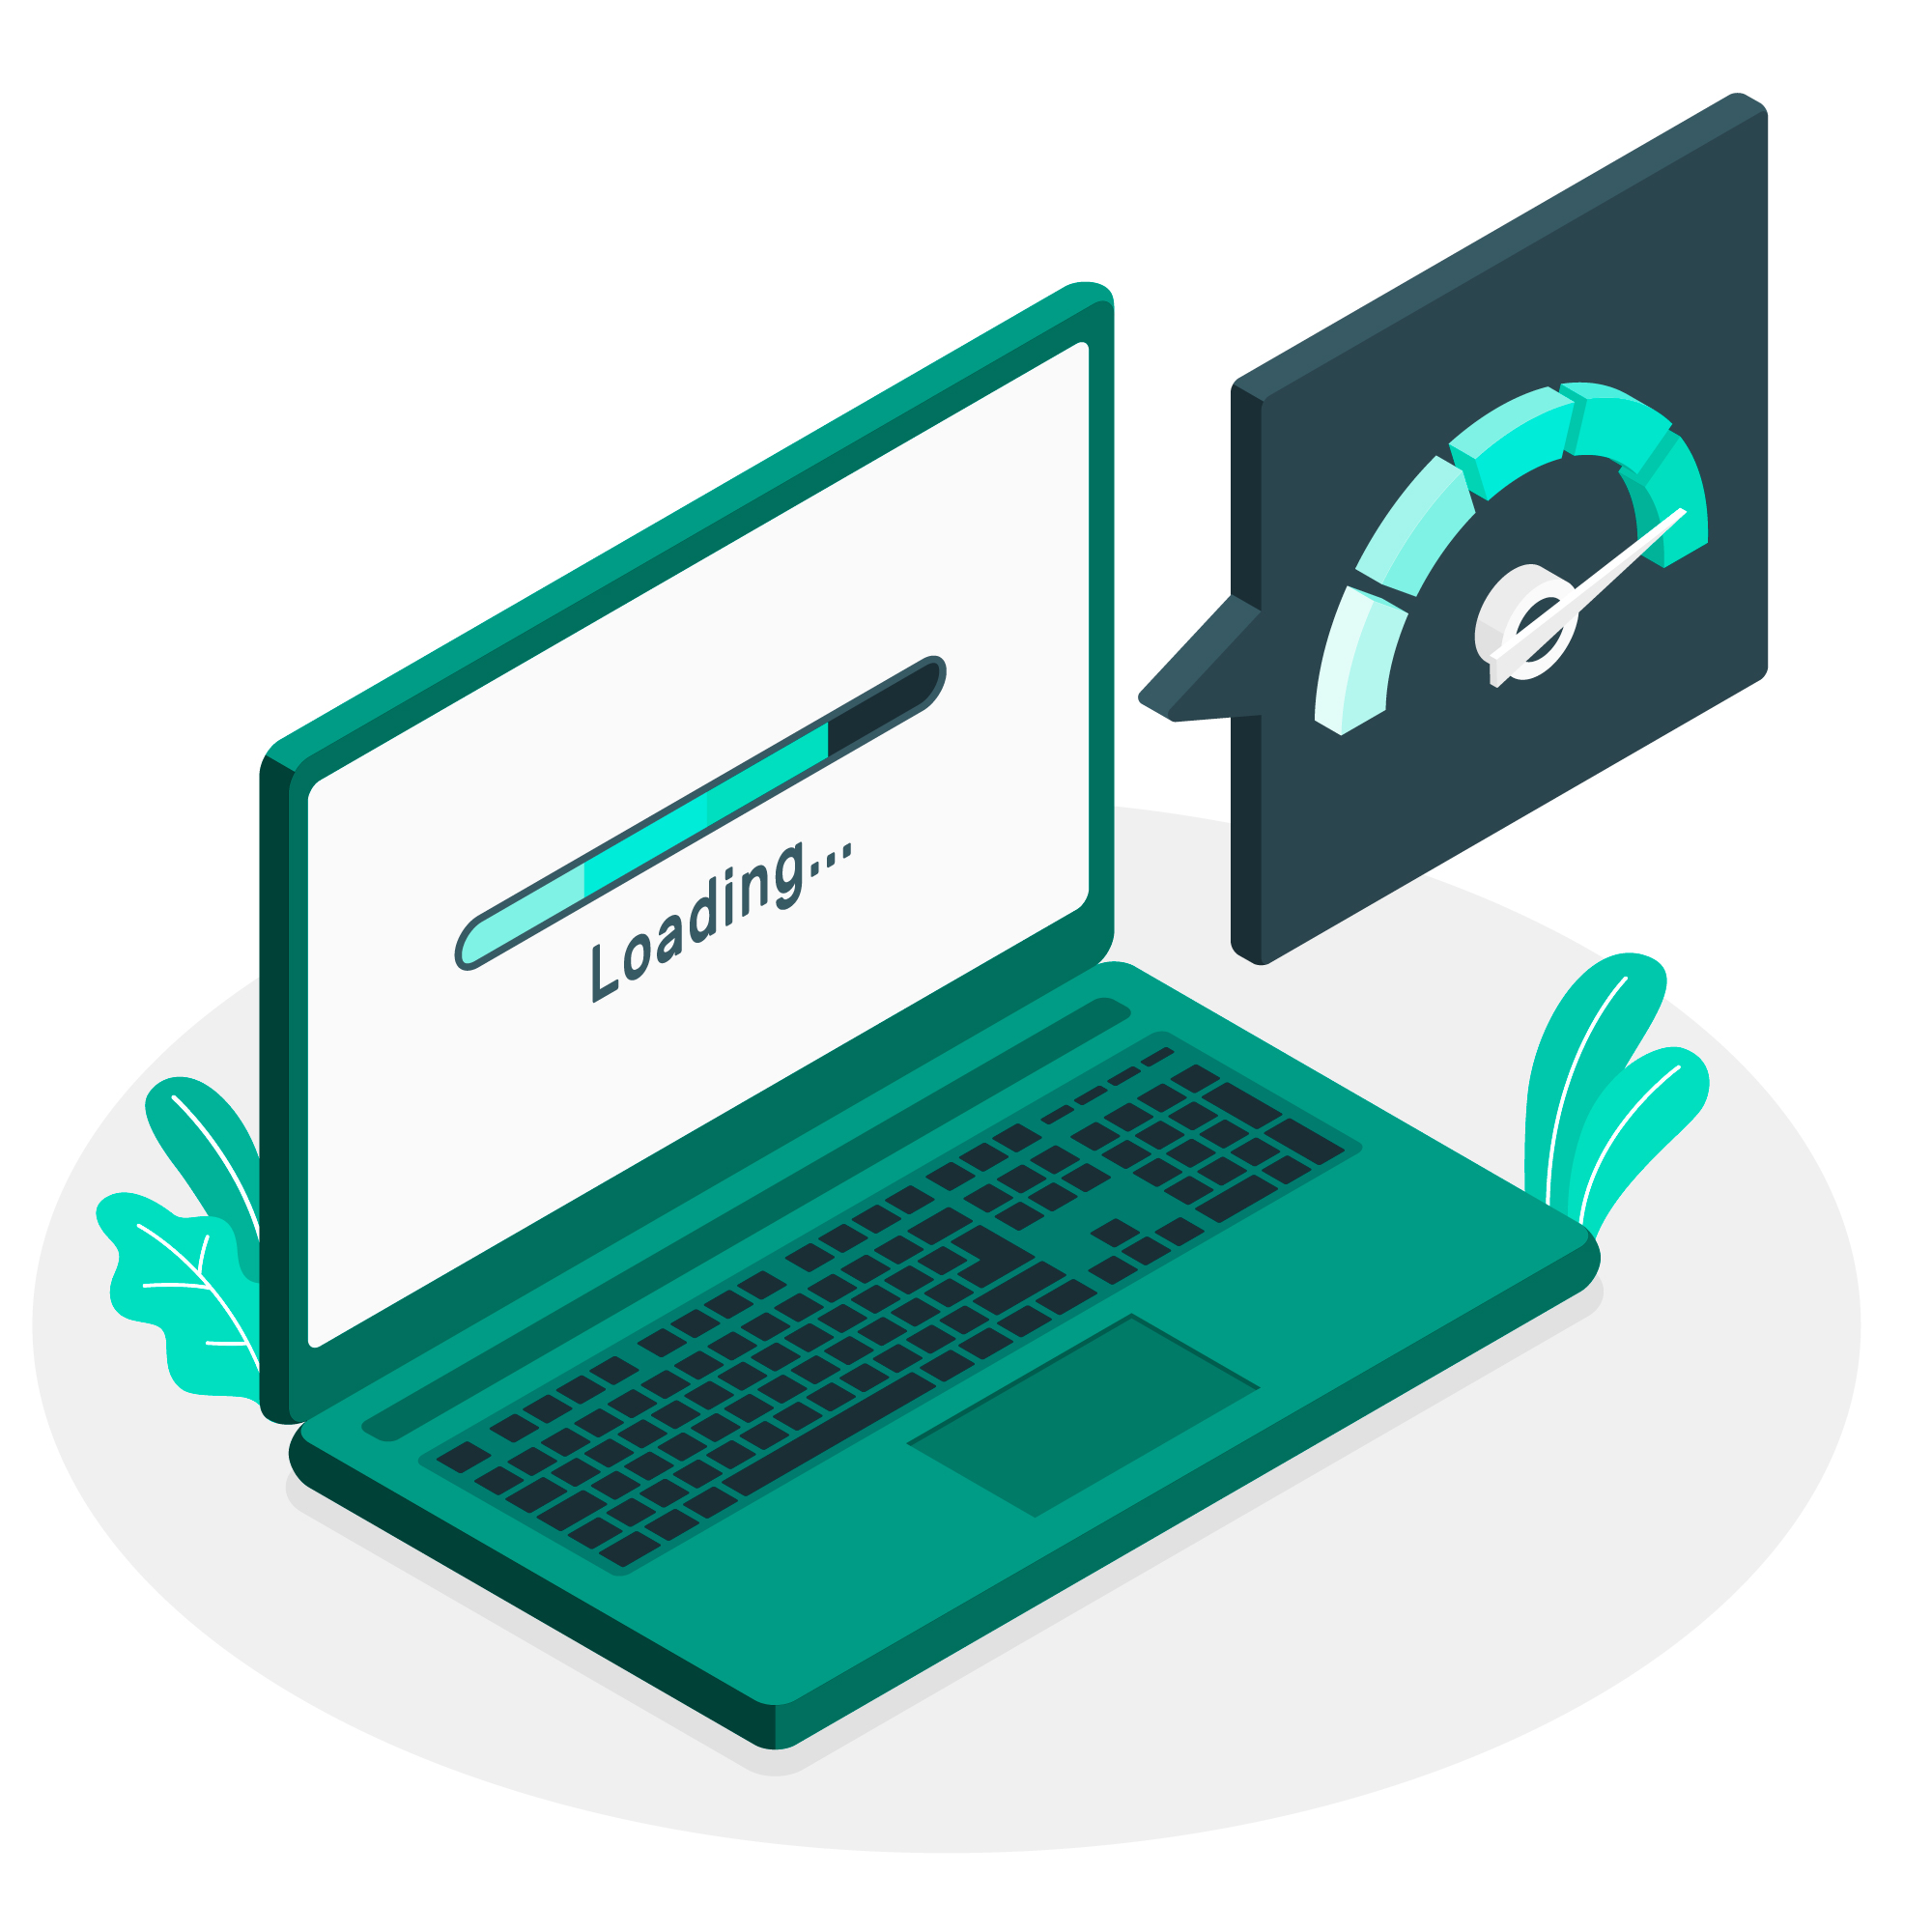 illustration of laptop with loading screen and speed meter to determine website ranking